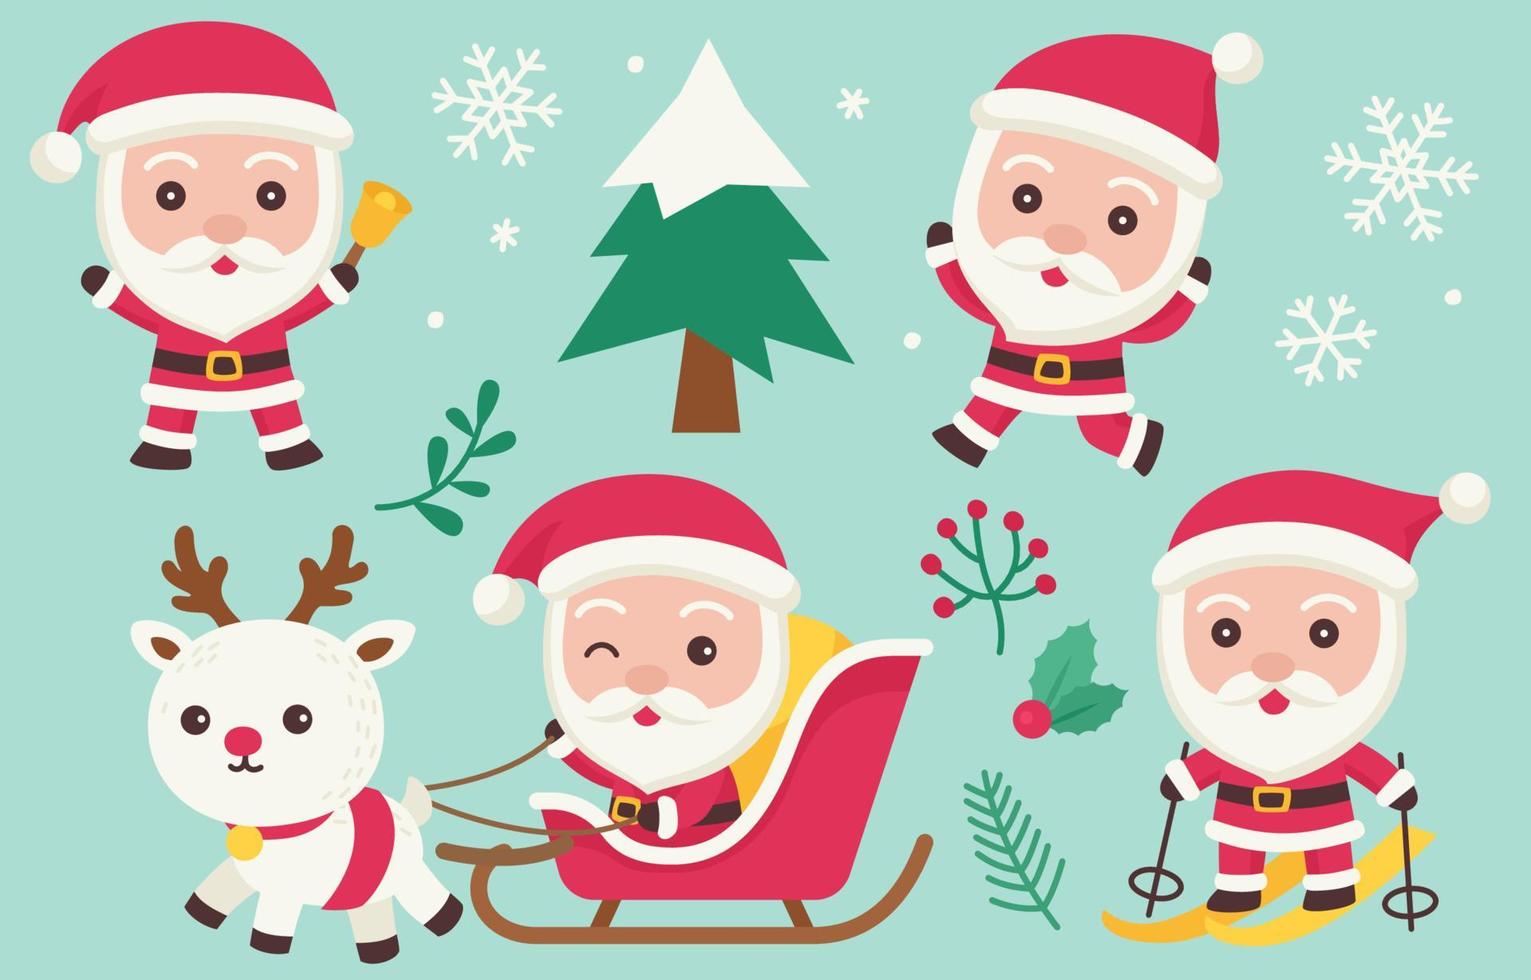 Santa claus character doodle in winter theme vector